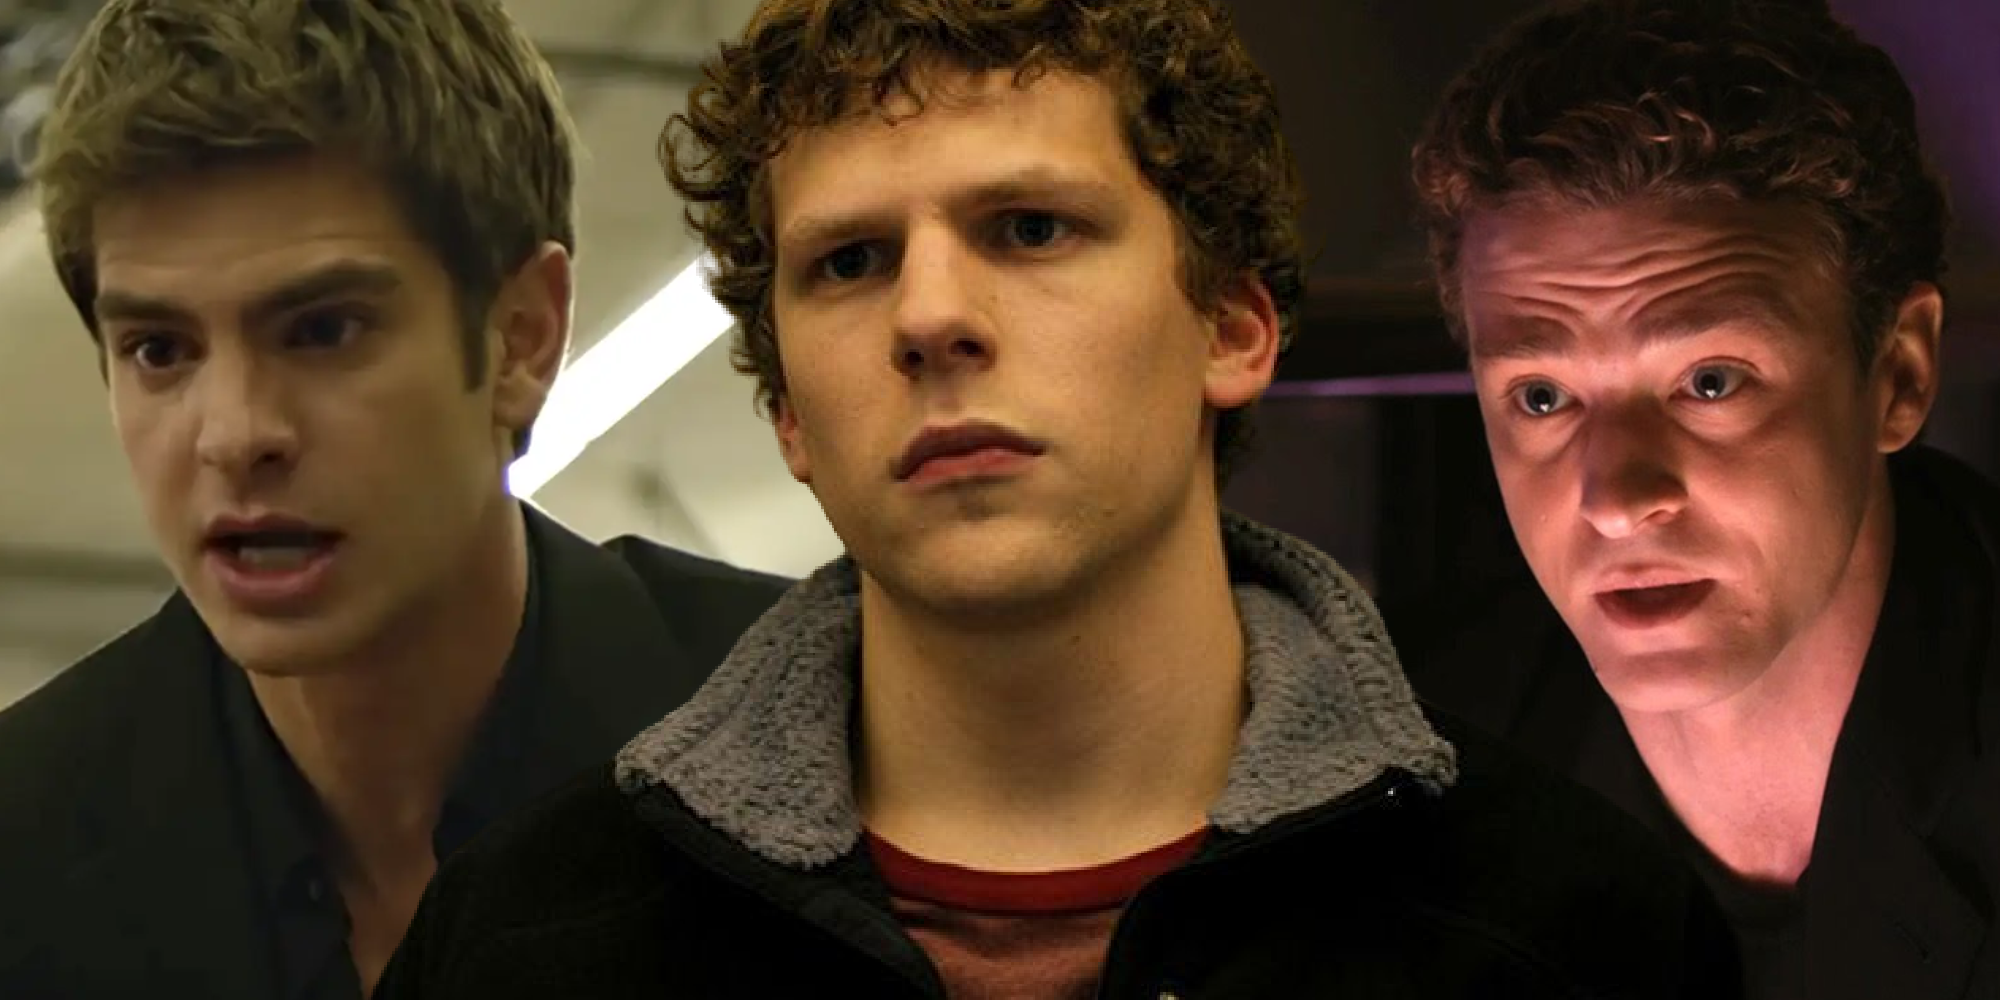 Garfield, Eisenberg and Timberlake in The Social Network